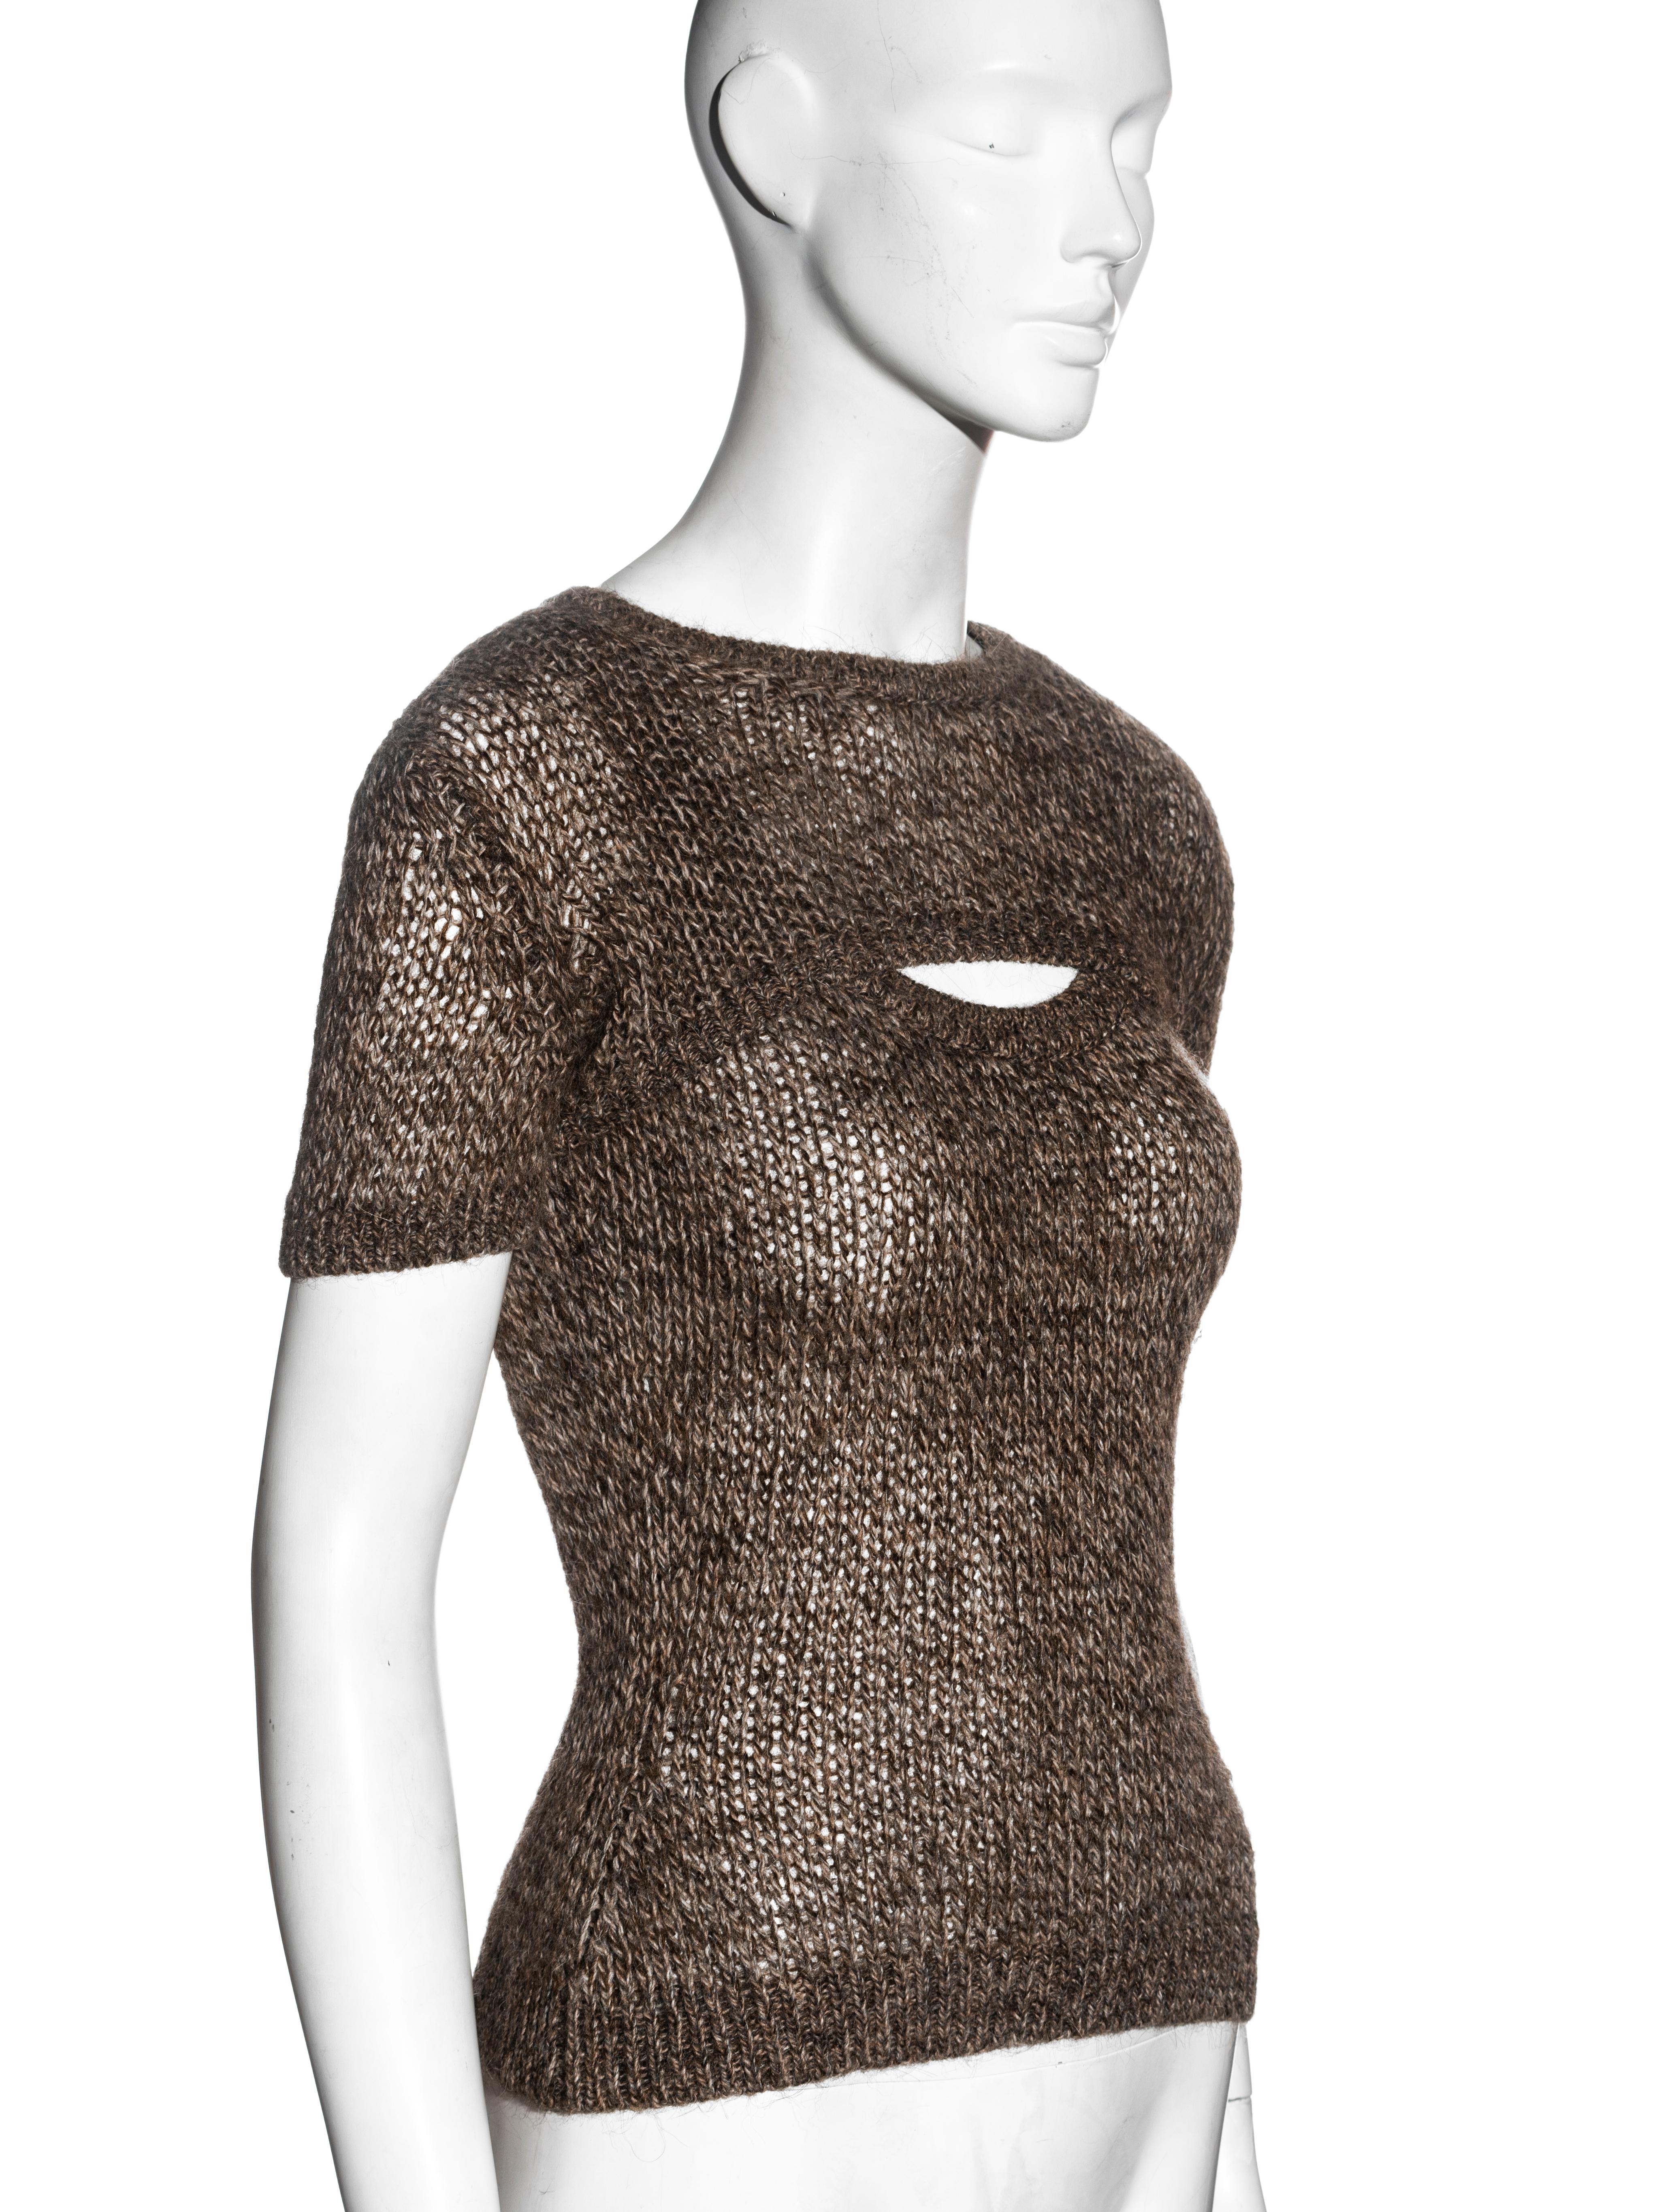 Women's Dolce & Gabbana brown knitted tank and crop top set, ss 1999